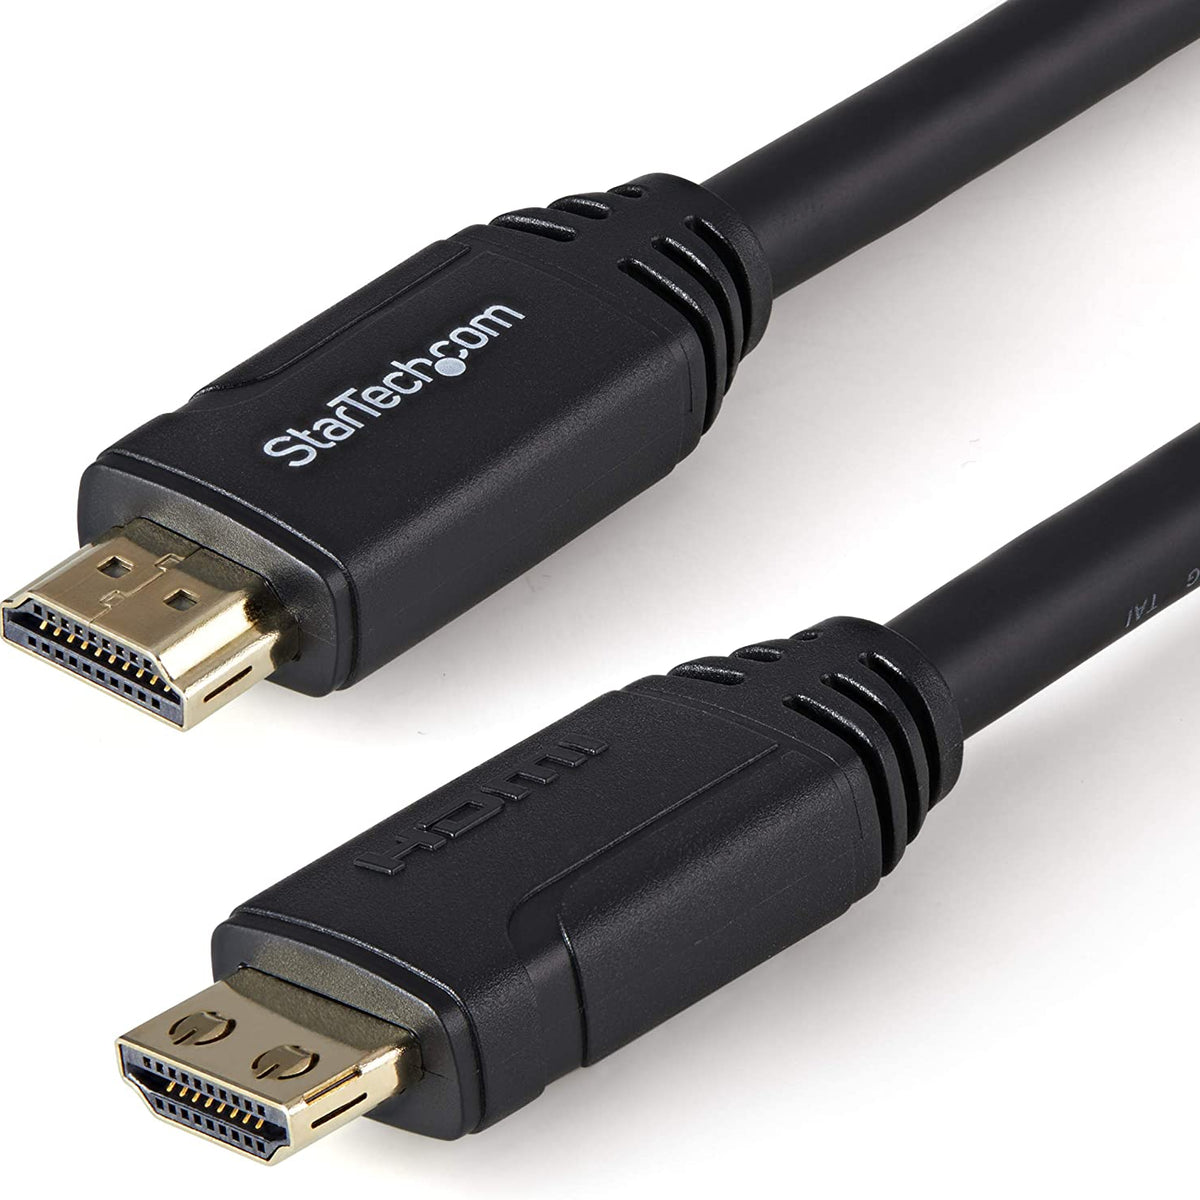 StarTech.com 3 ft High Speed HDMI Cable with Ethernet - Ultra HD 4k x 2k  HDMI Cable - HDMI to HDMI M/M - 1080p Audio/Video, Gold-Plated (HDMIMM3HS)